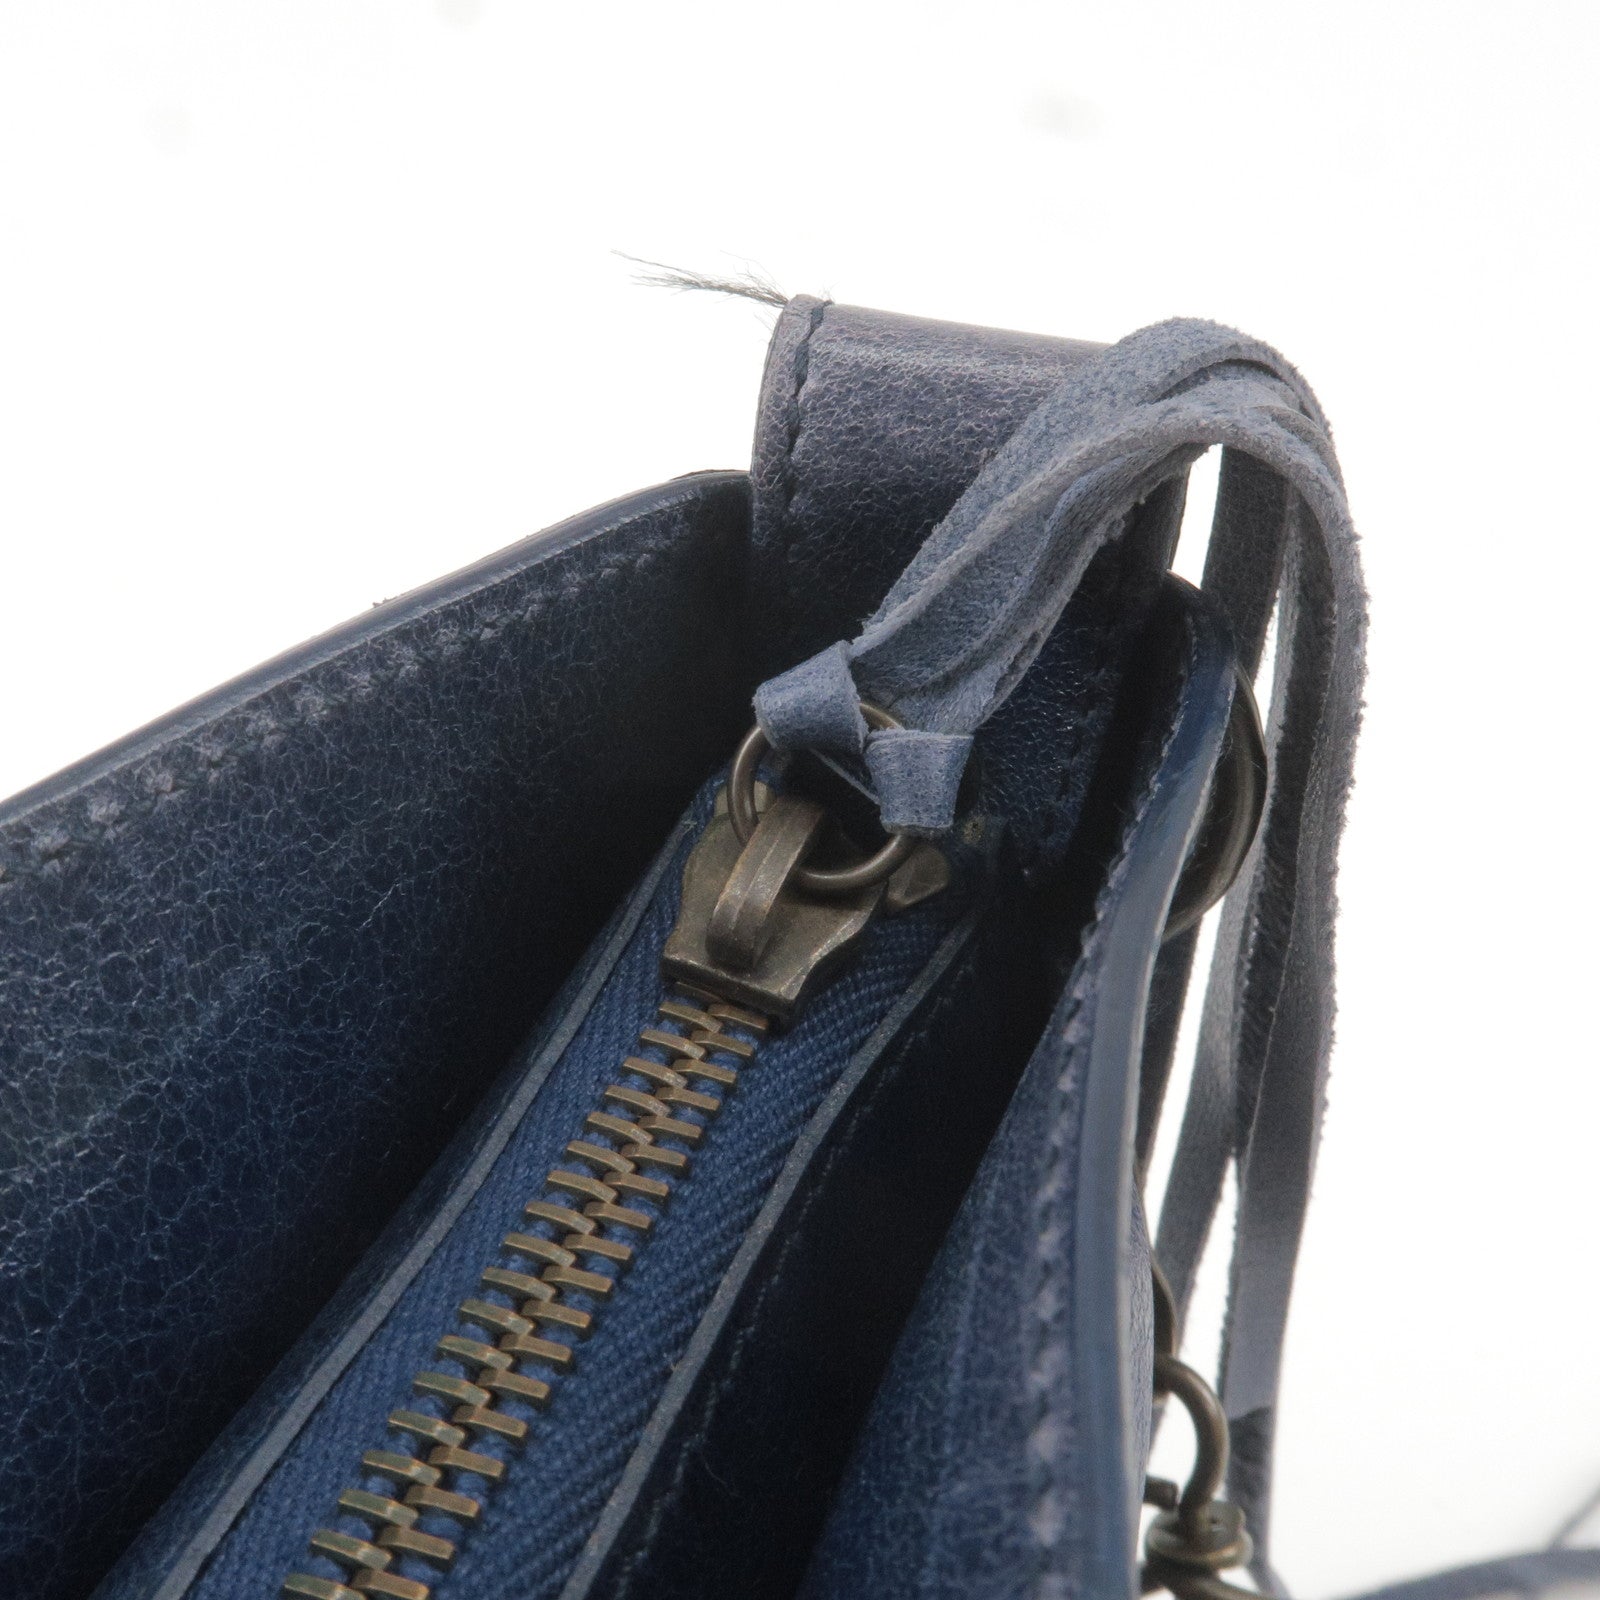 The - Hand - Michael Kors Toiletry Bags - Blue - Bag ep_vintage luxury Store - First - Bag - Leather - Navy - BALENCIAGA - 2Way - – dct